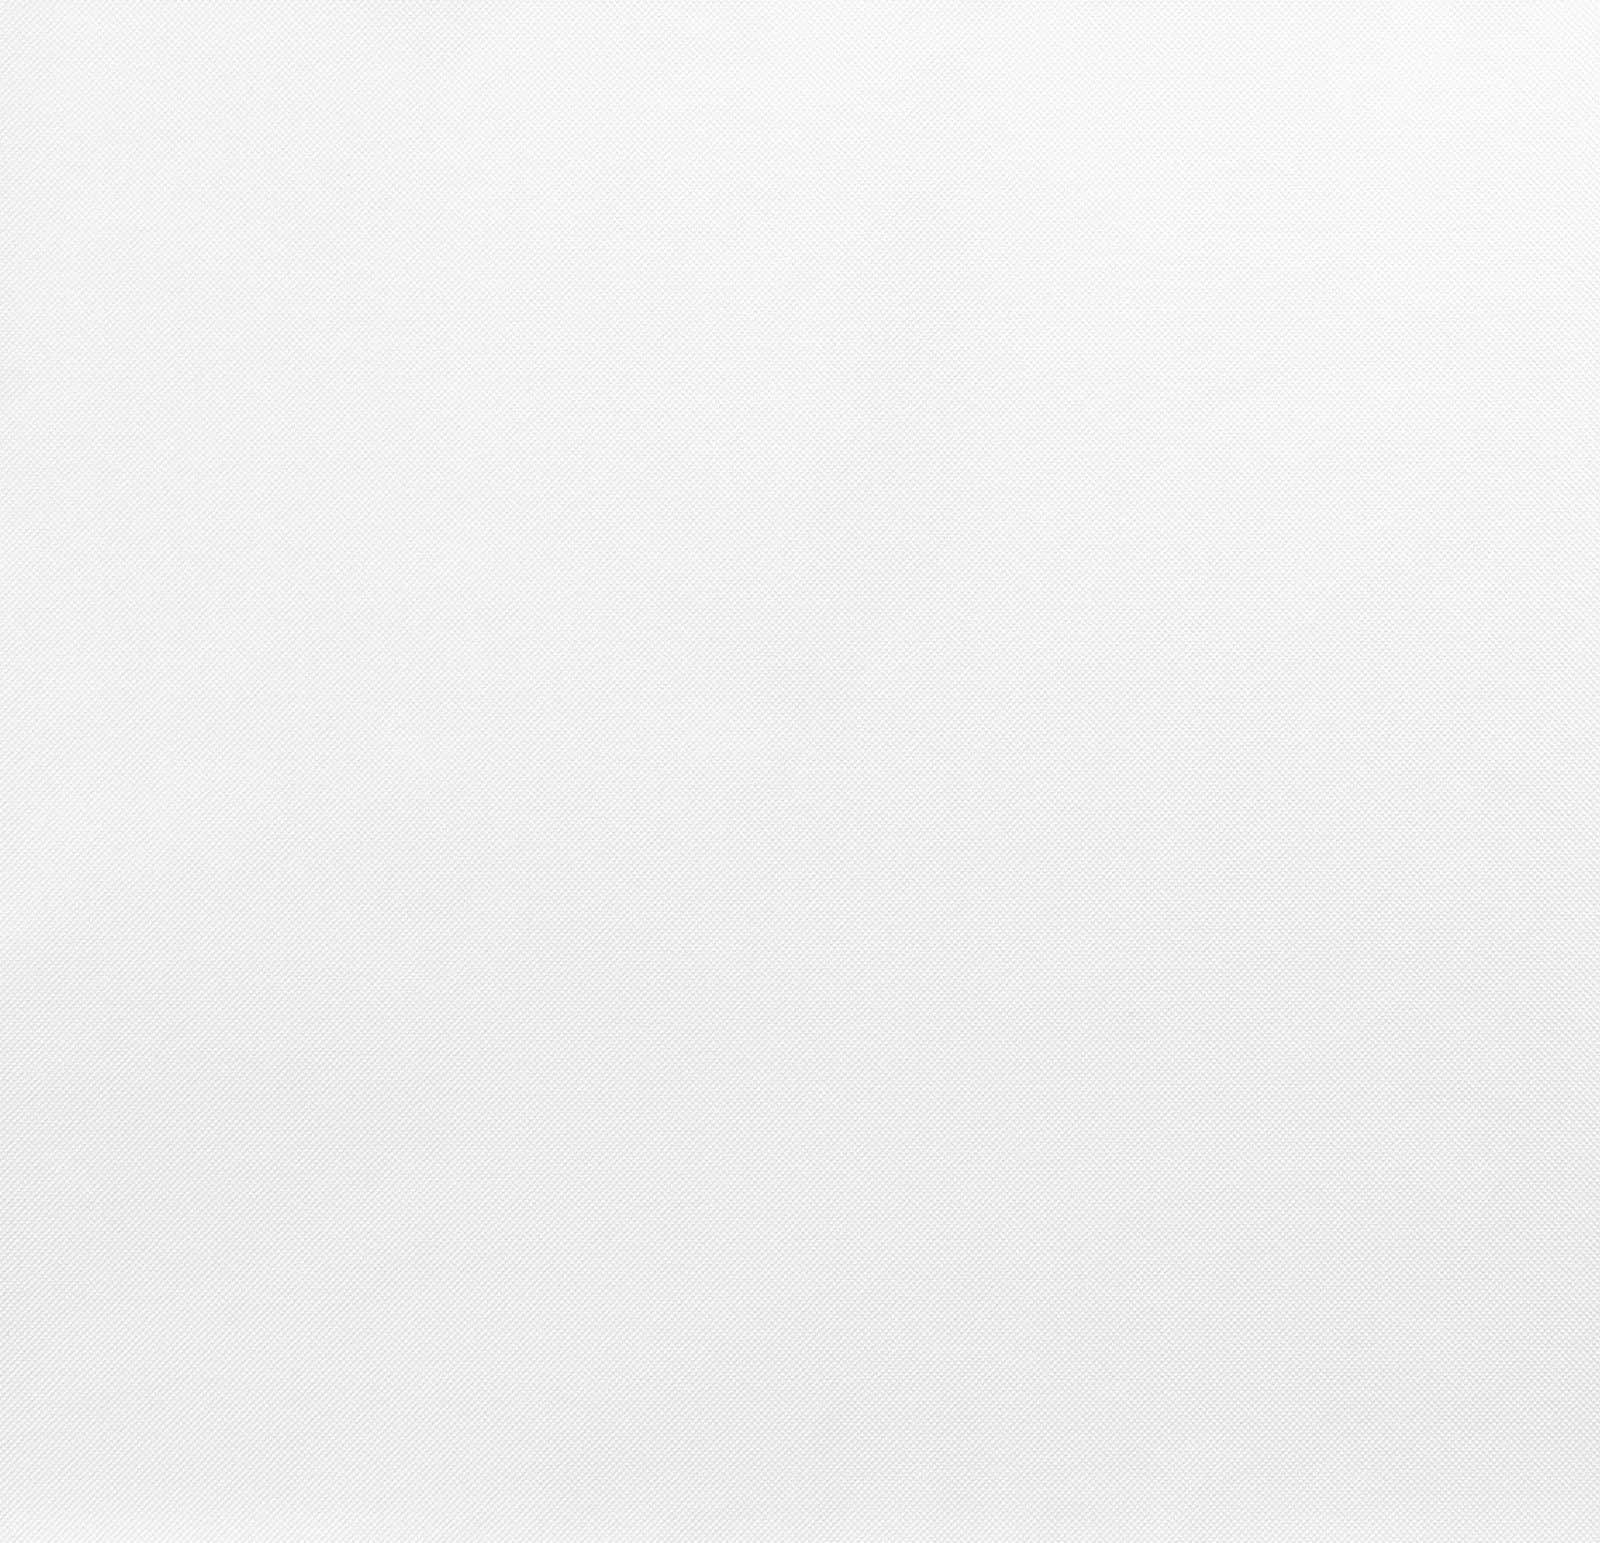 Download Solid White Background | Wallpapers.com